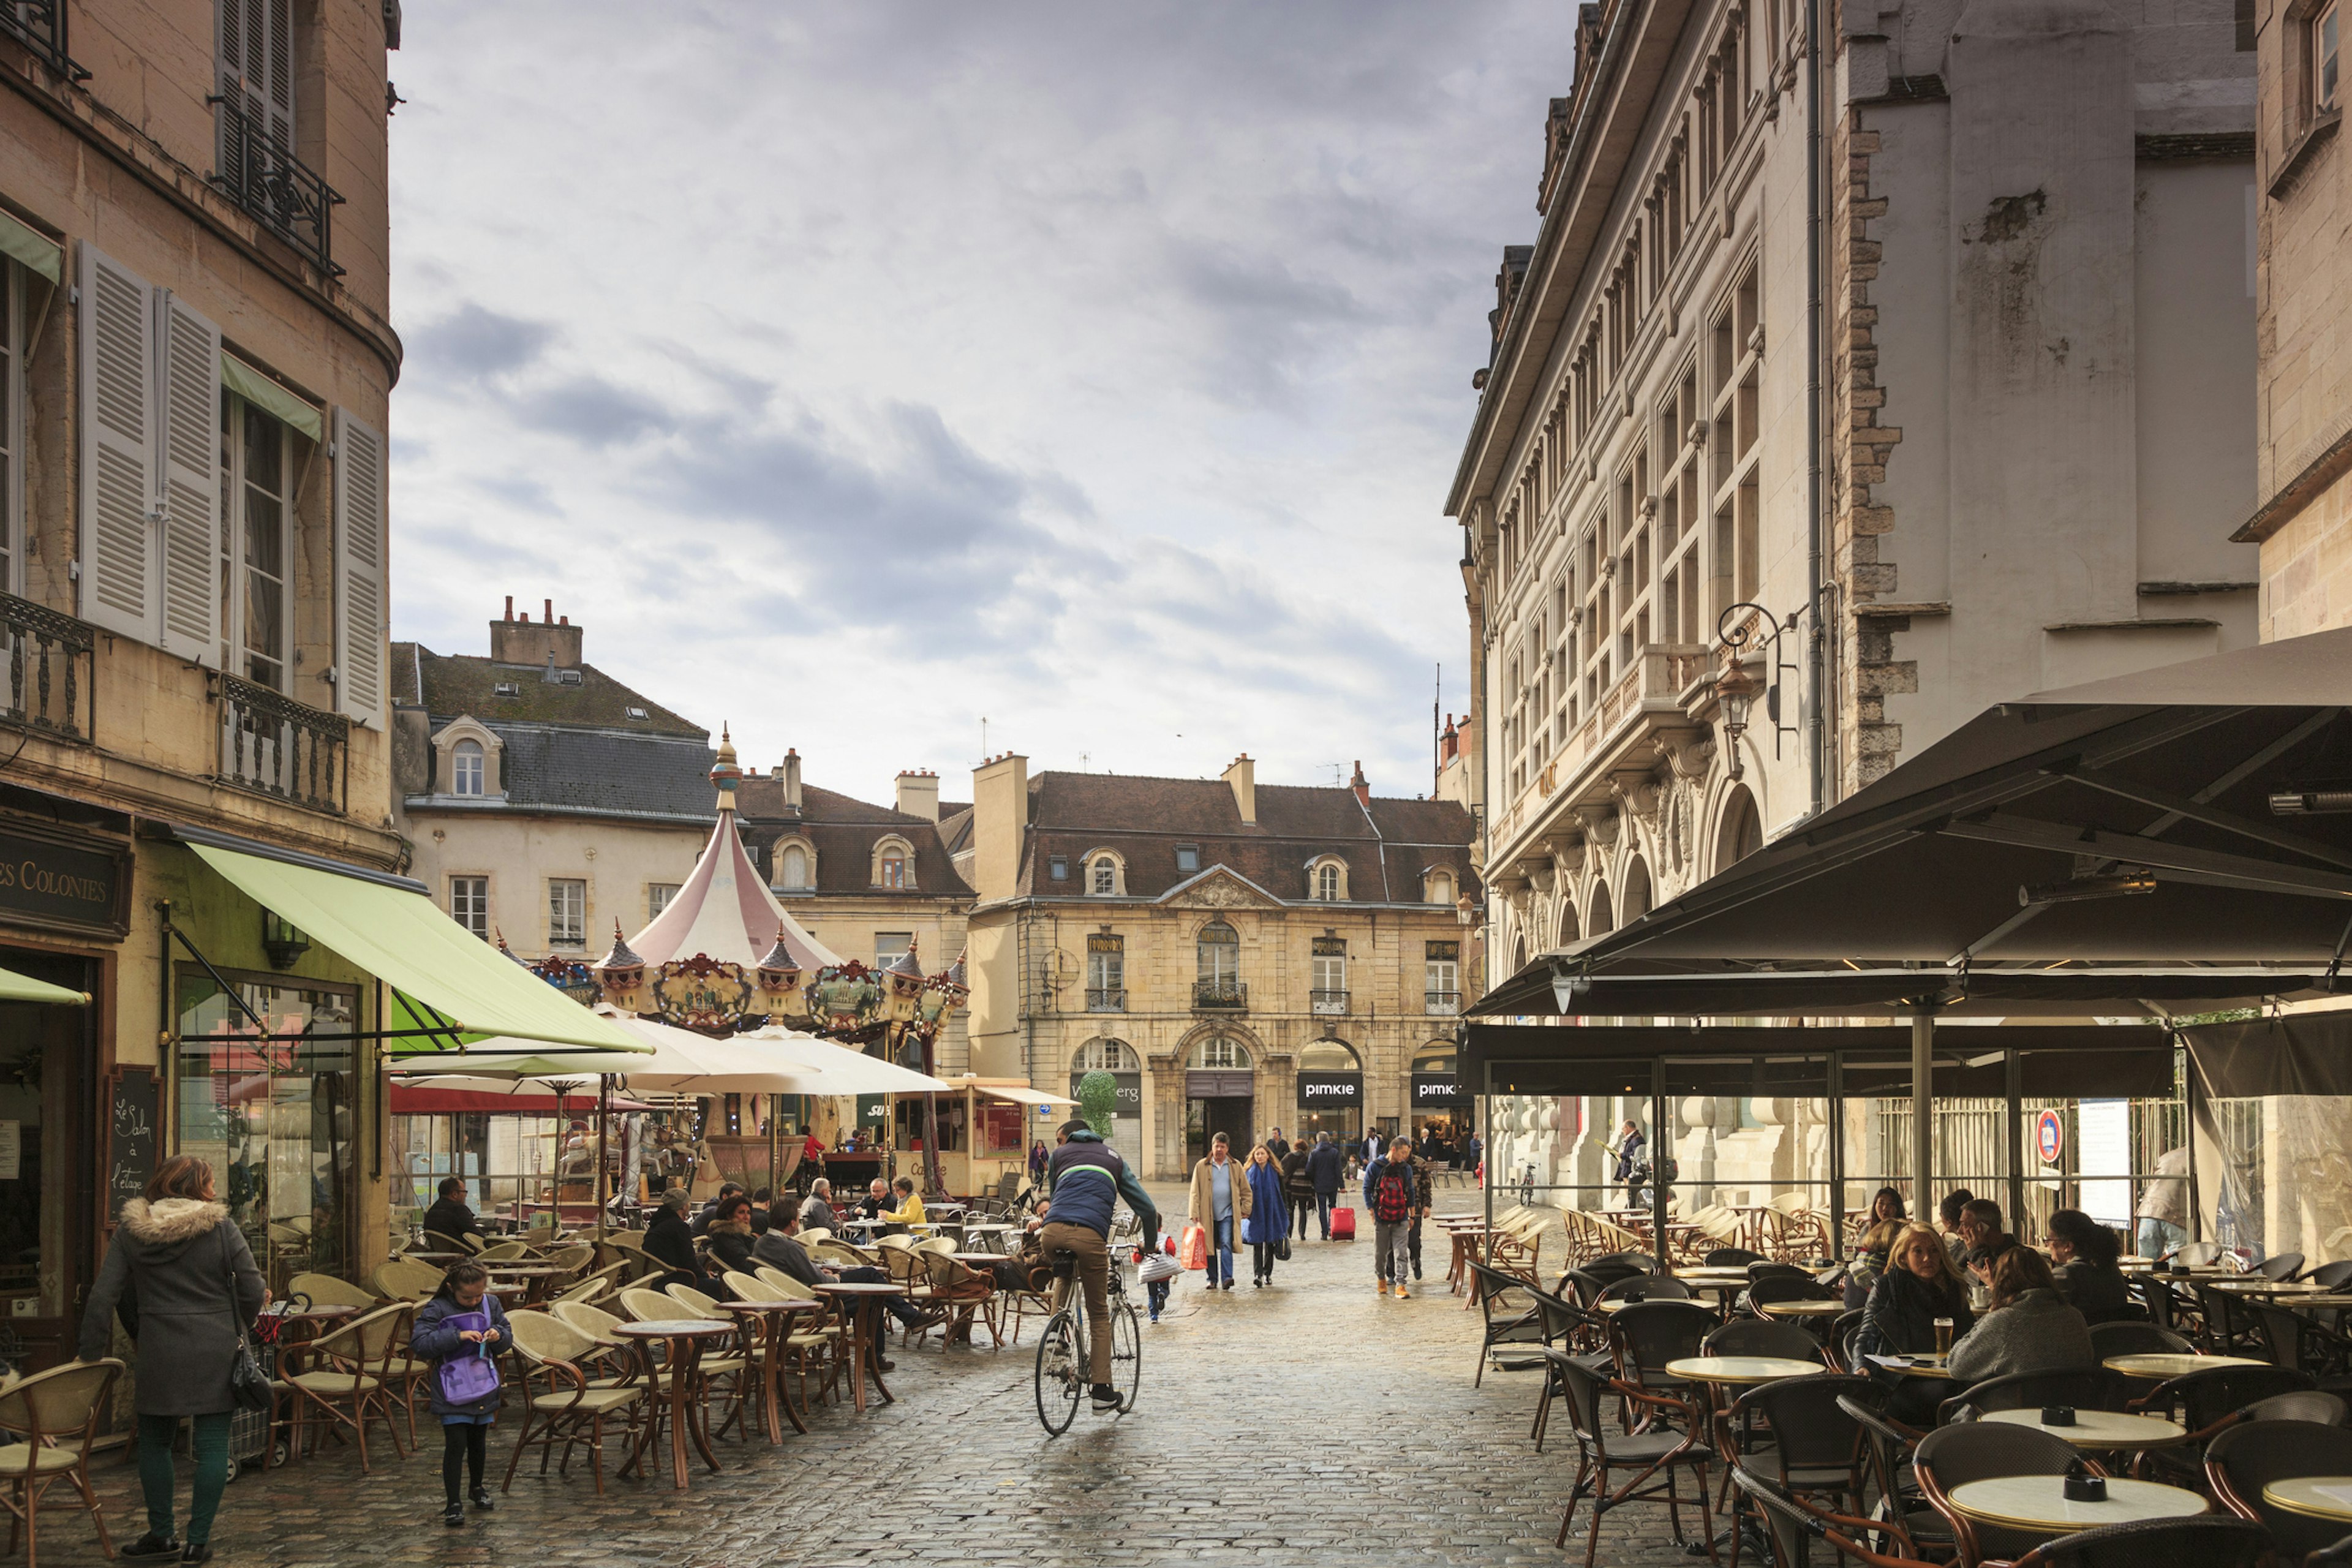 Mooching around the streets of Dijon is a charming way to spend a day